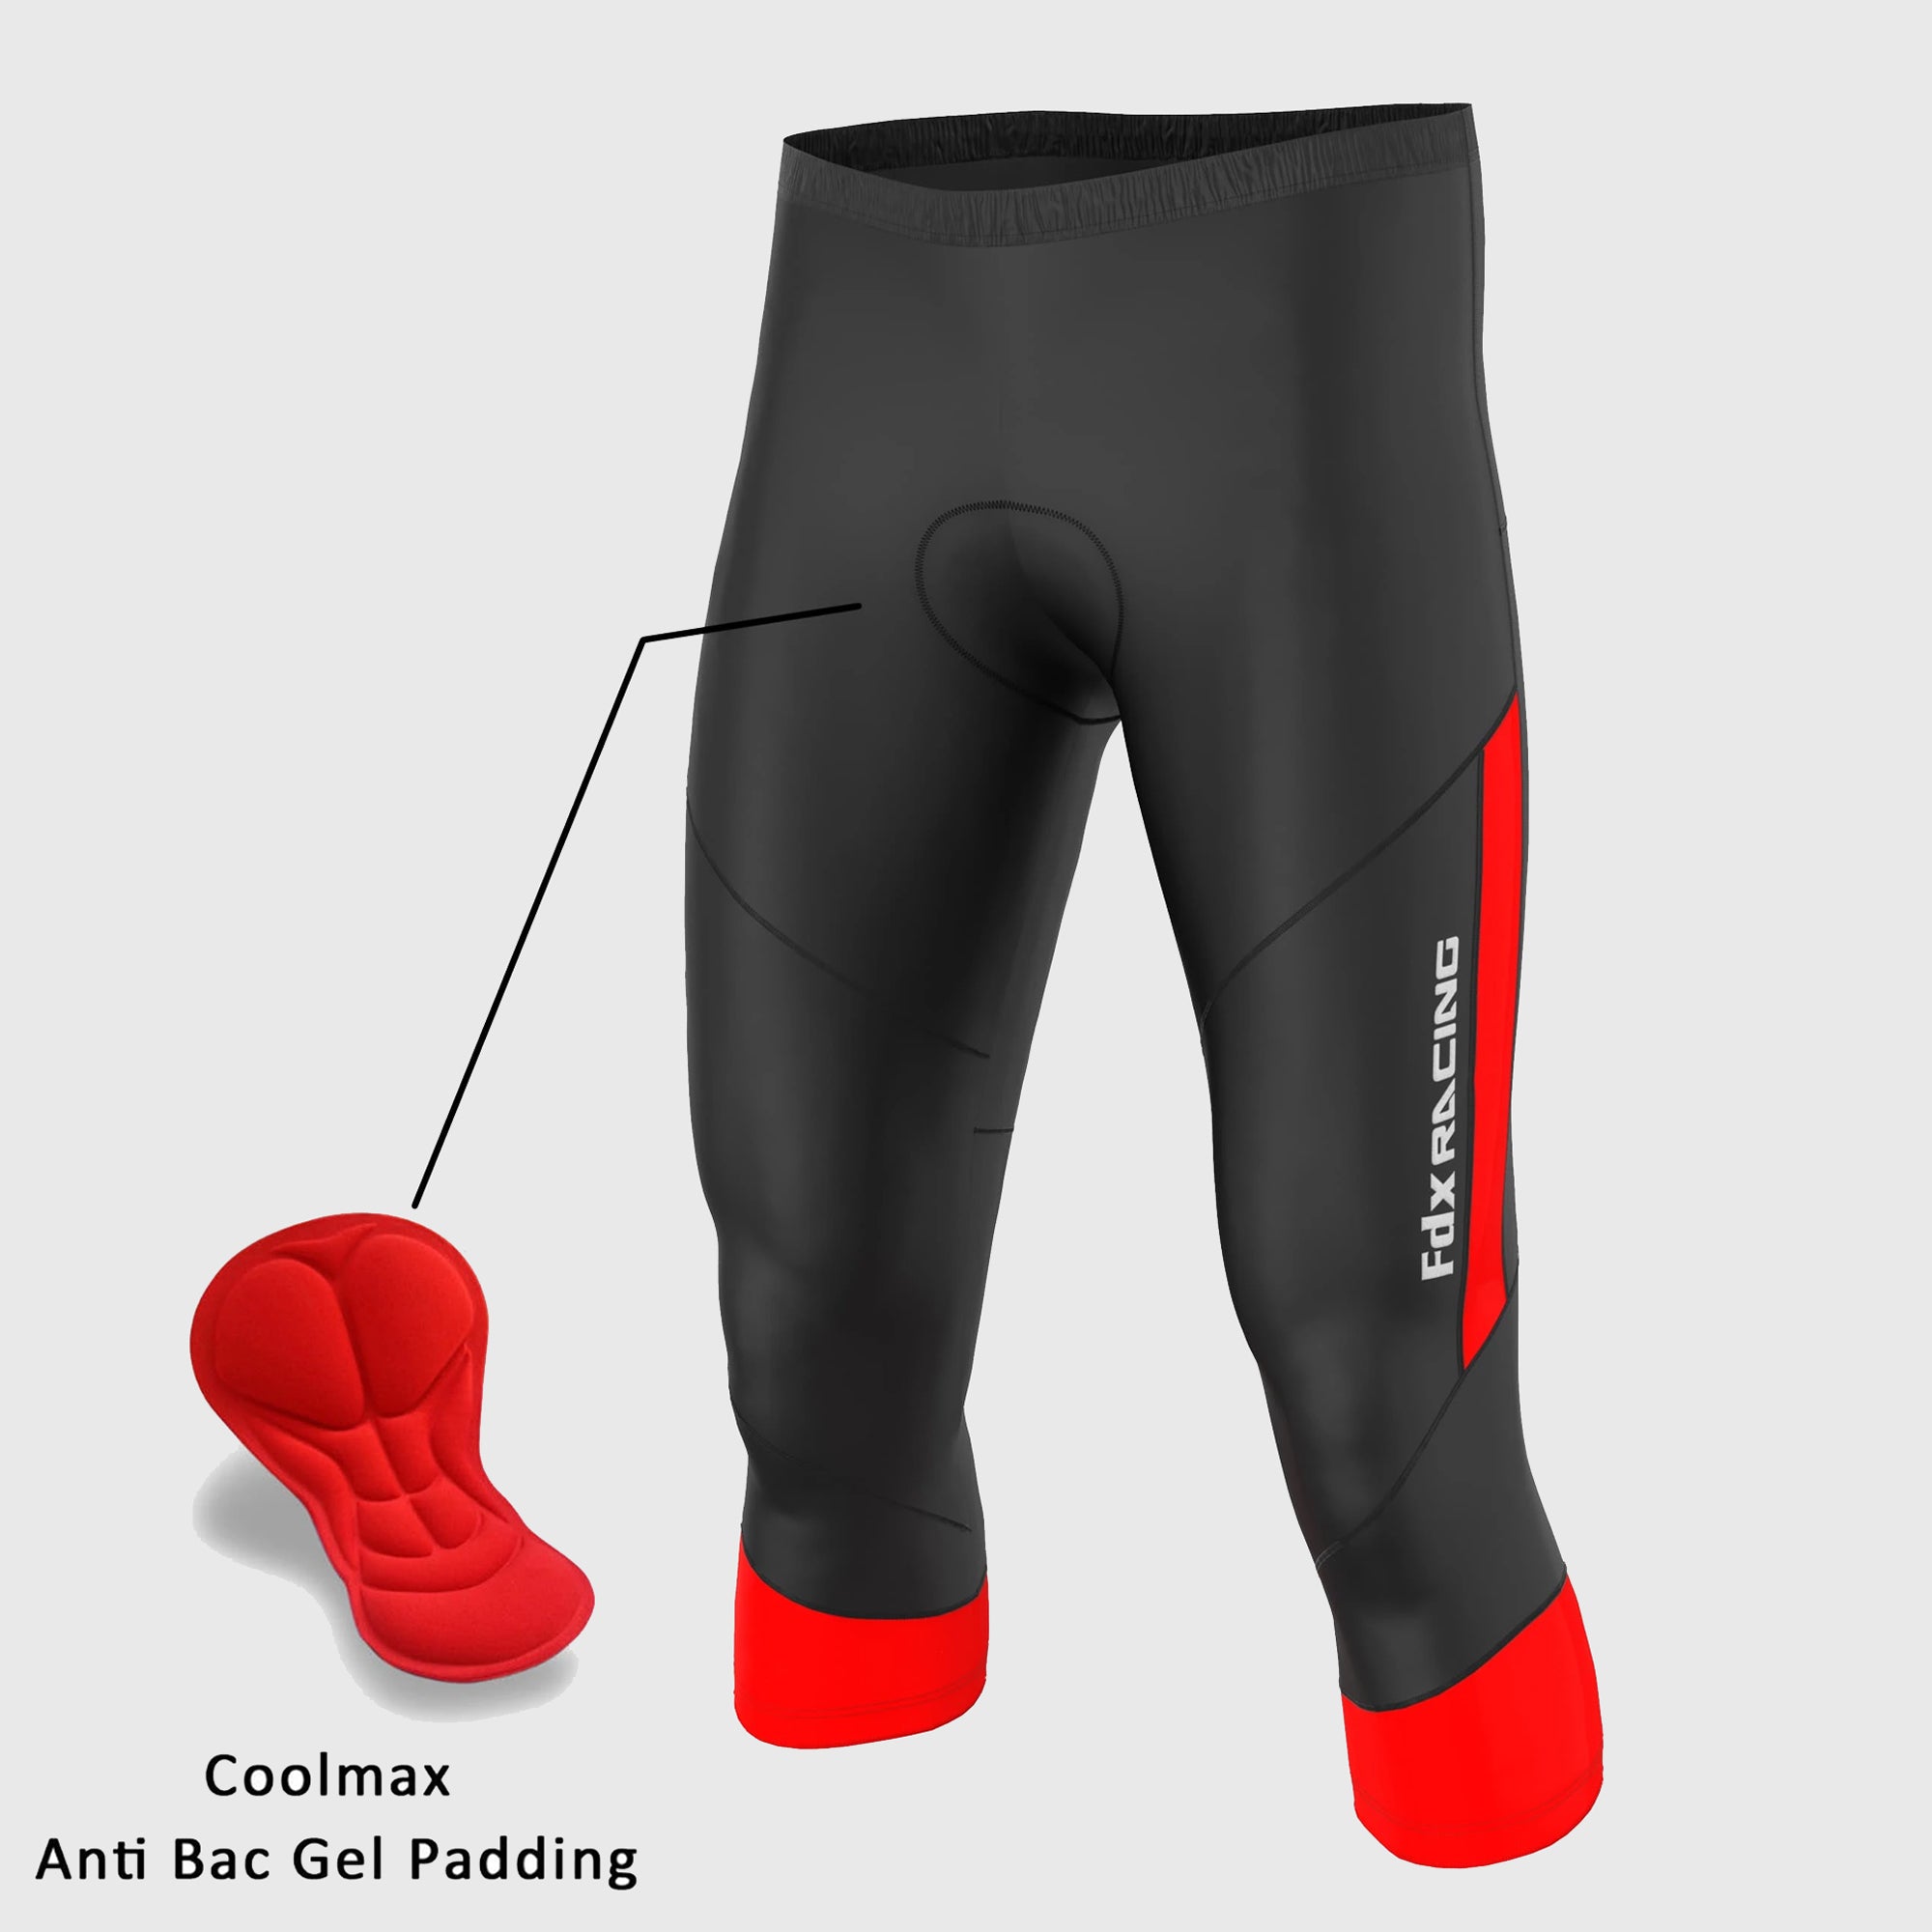 Fdx Mens Black & Red Gel Padded 3/4 Cycling Shorts for Summer Best Outdoor Knickers Road Bike Short Length Pants - Gallop